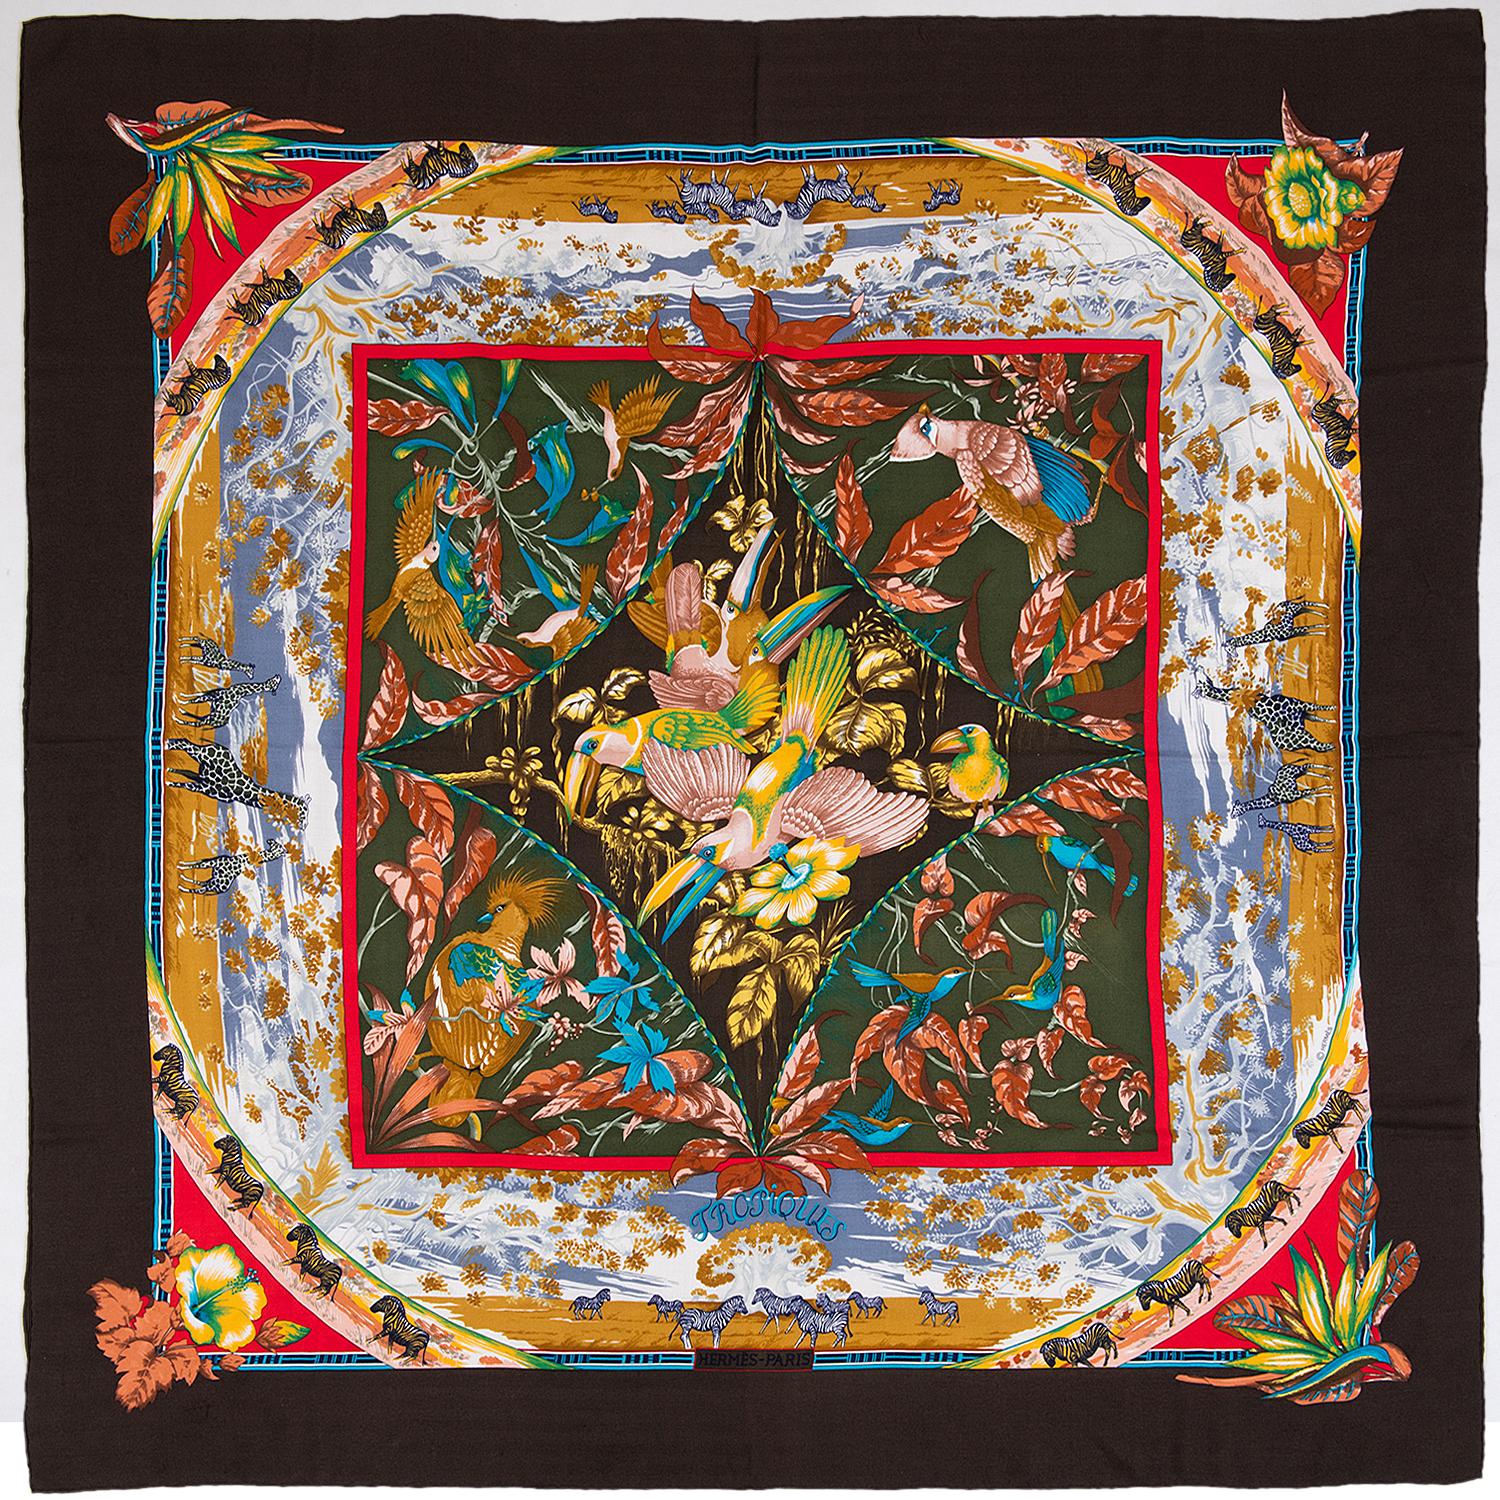 Pristine Hermes Silk & Cashmere Shawl 'Tropiques' by Laurence Bourthoumieu In Excellent Condition For Sale In London, GB